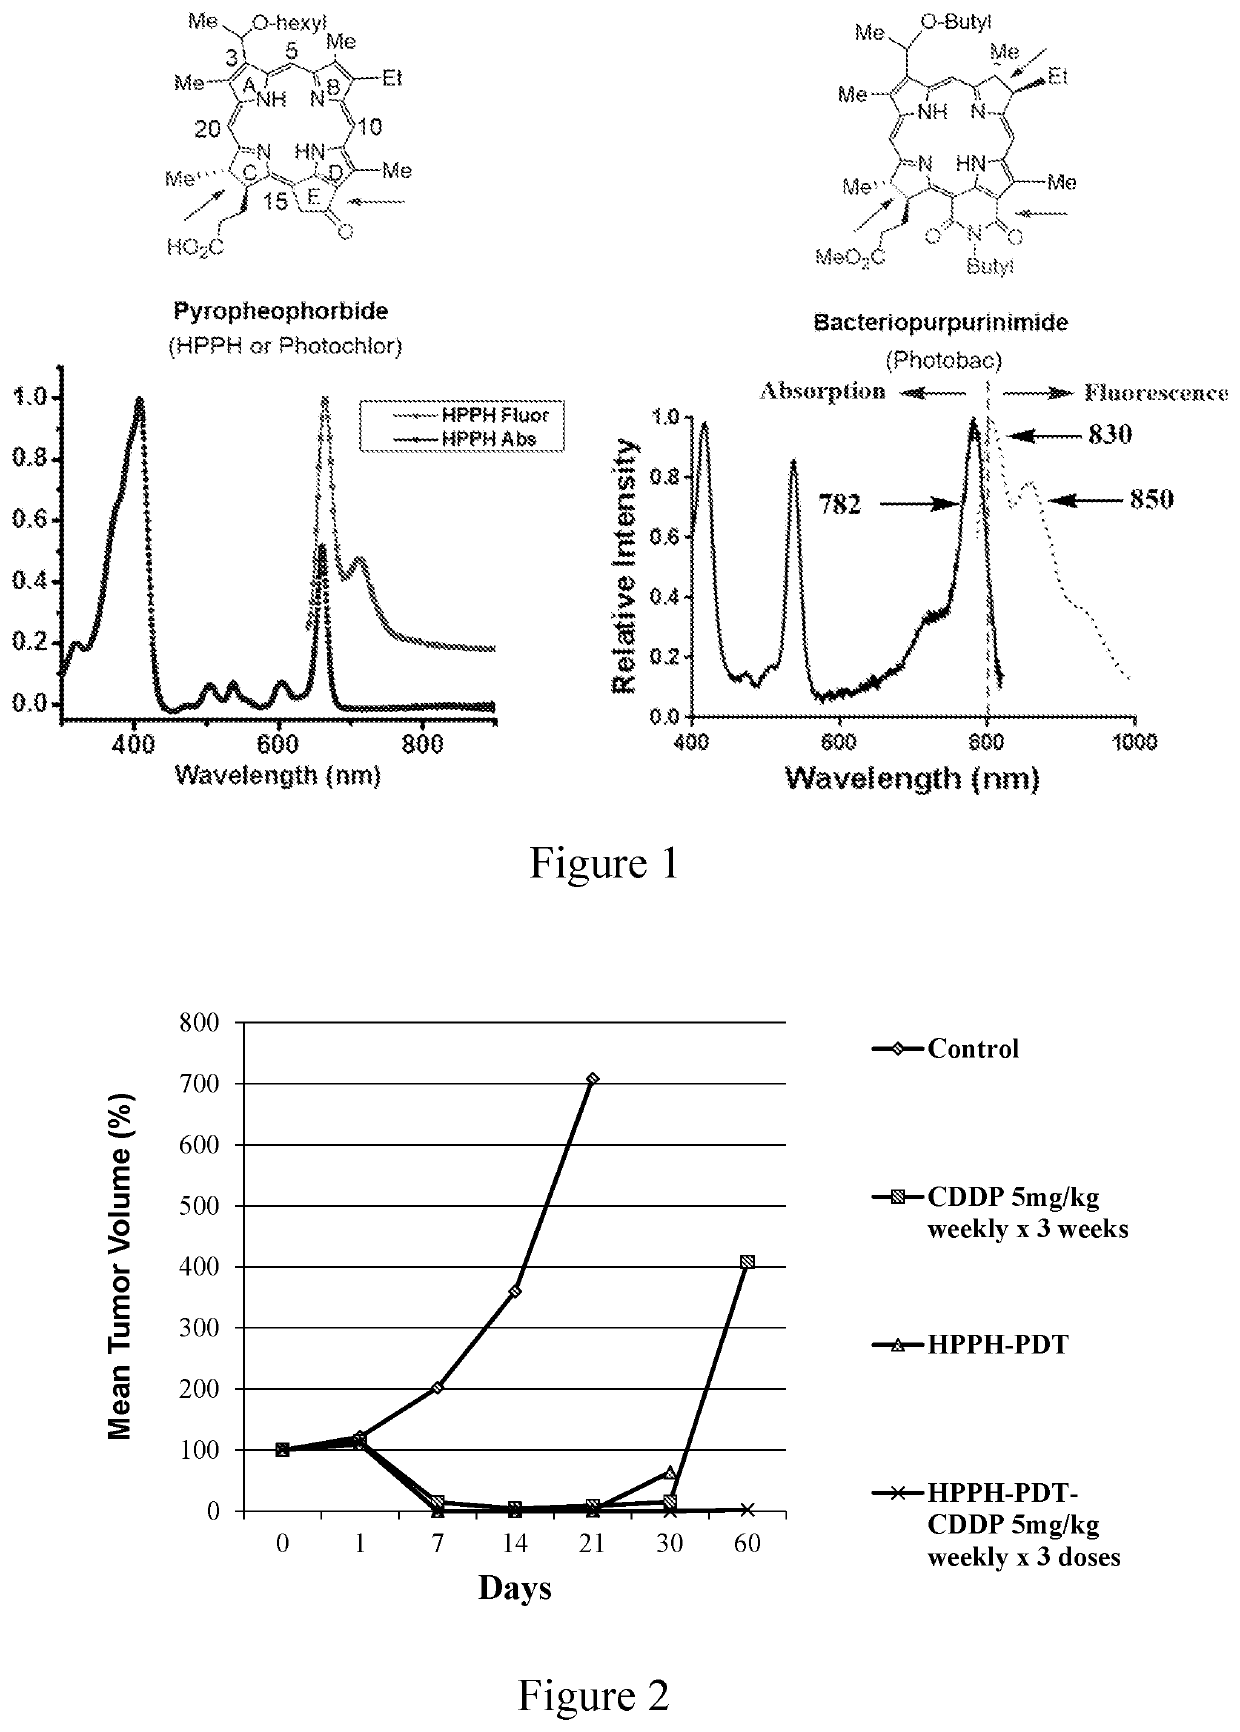 Near infrared (NIR) photodynamic therapy (PDT) in combination with chemotherapy